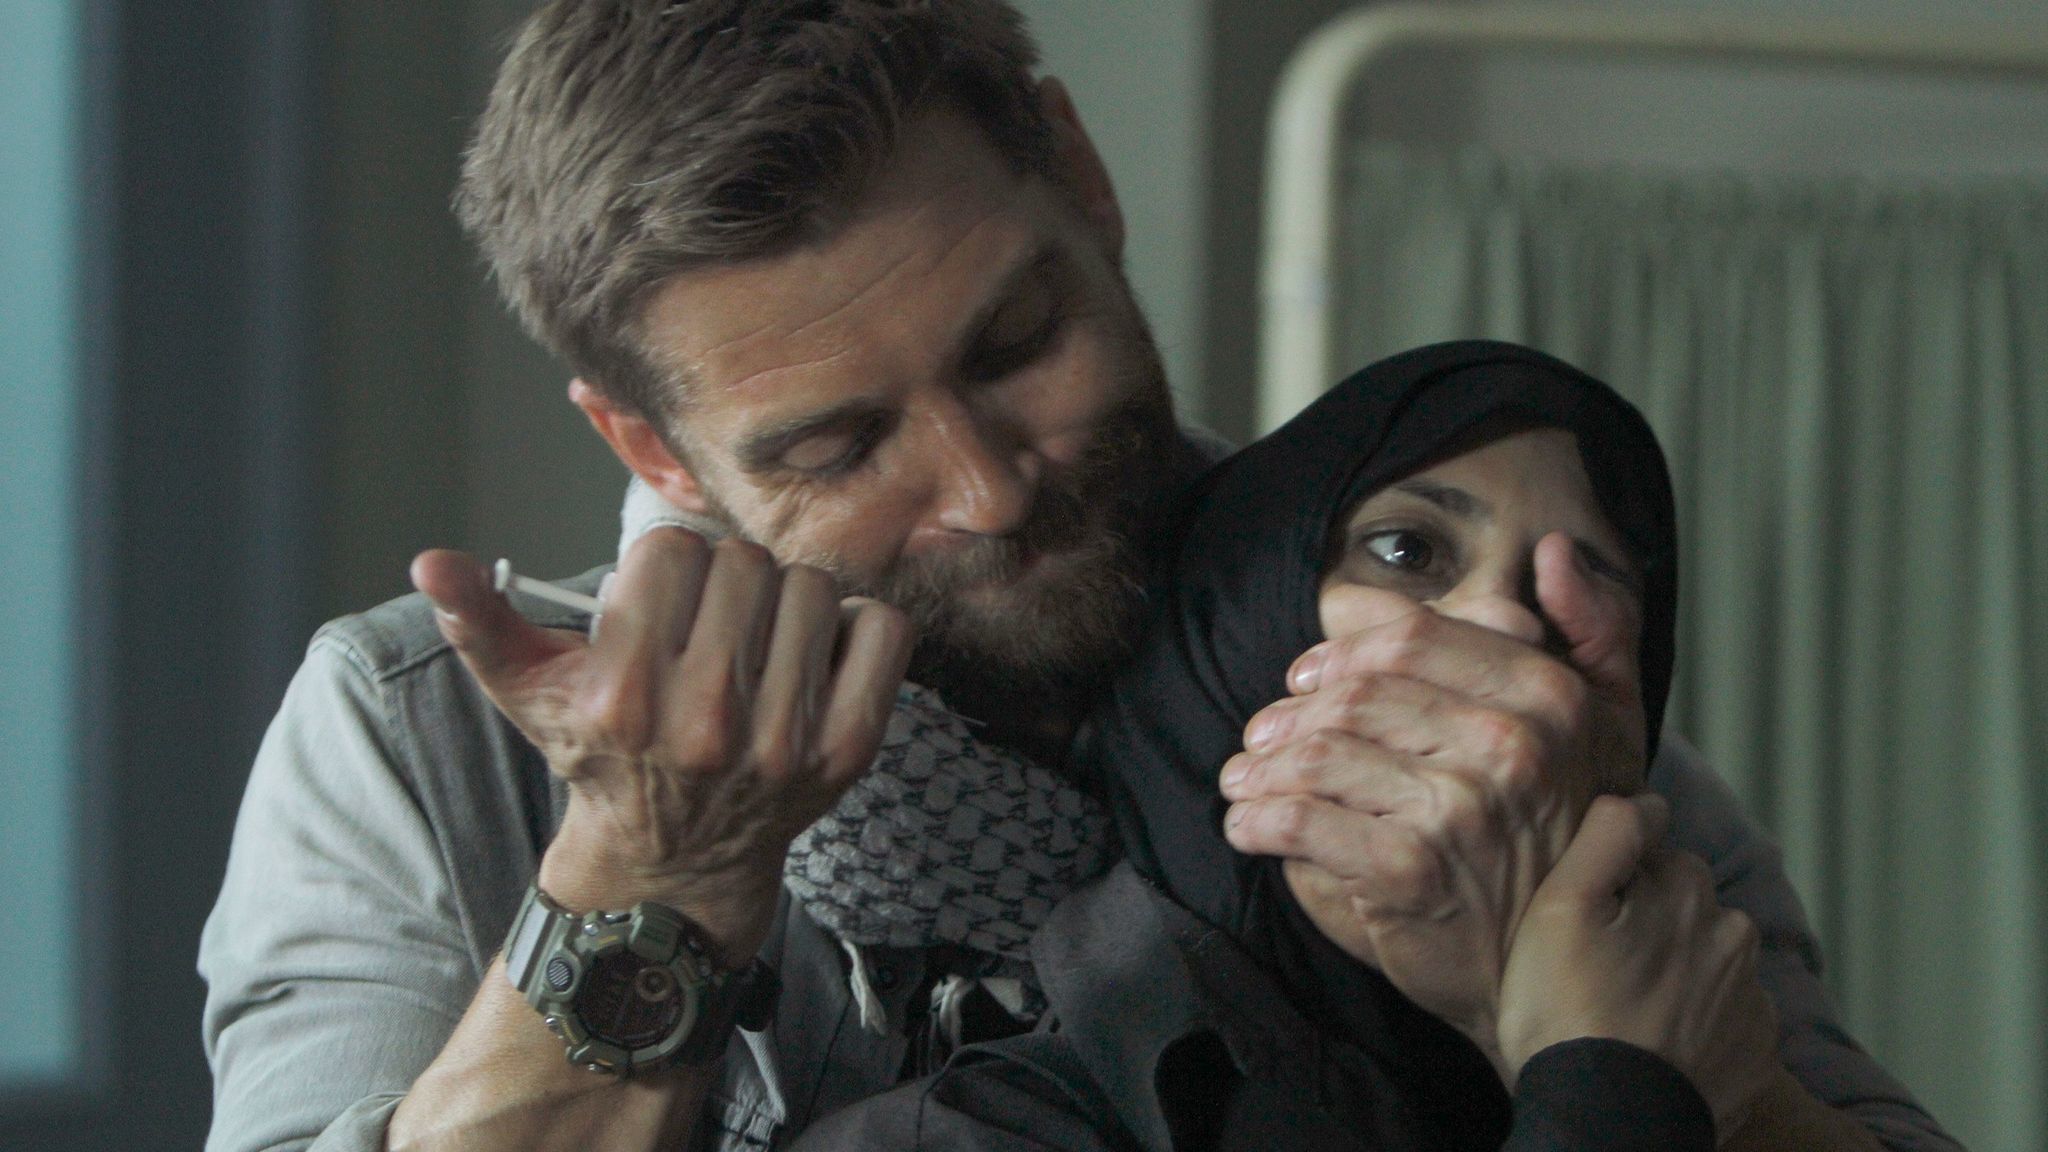 Mike Vogel and Shereen Martin on "The Brave."